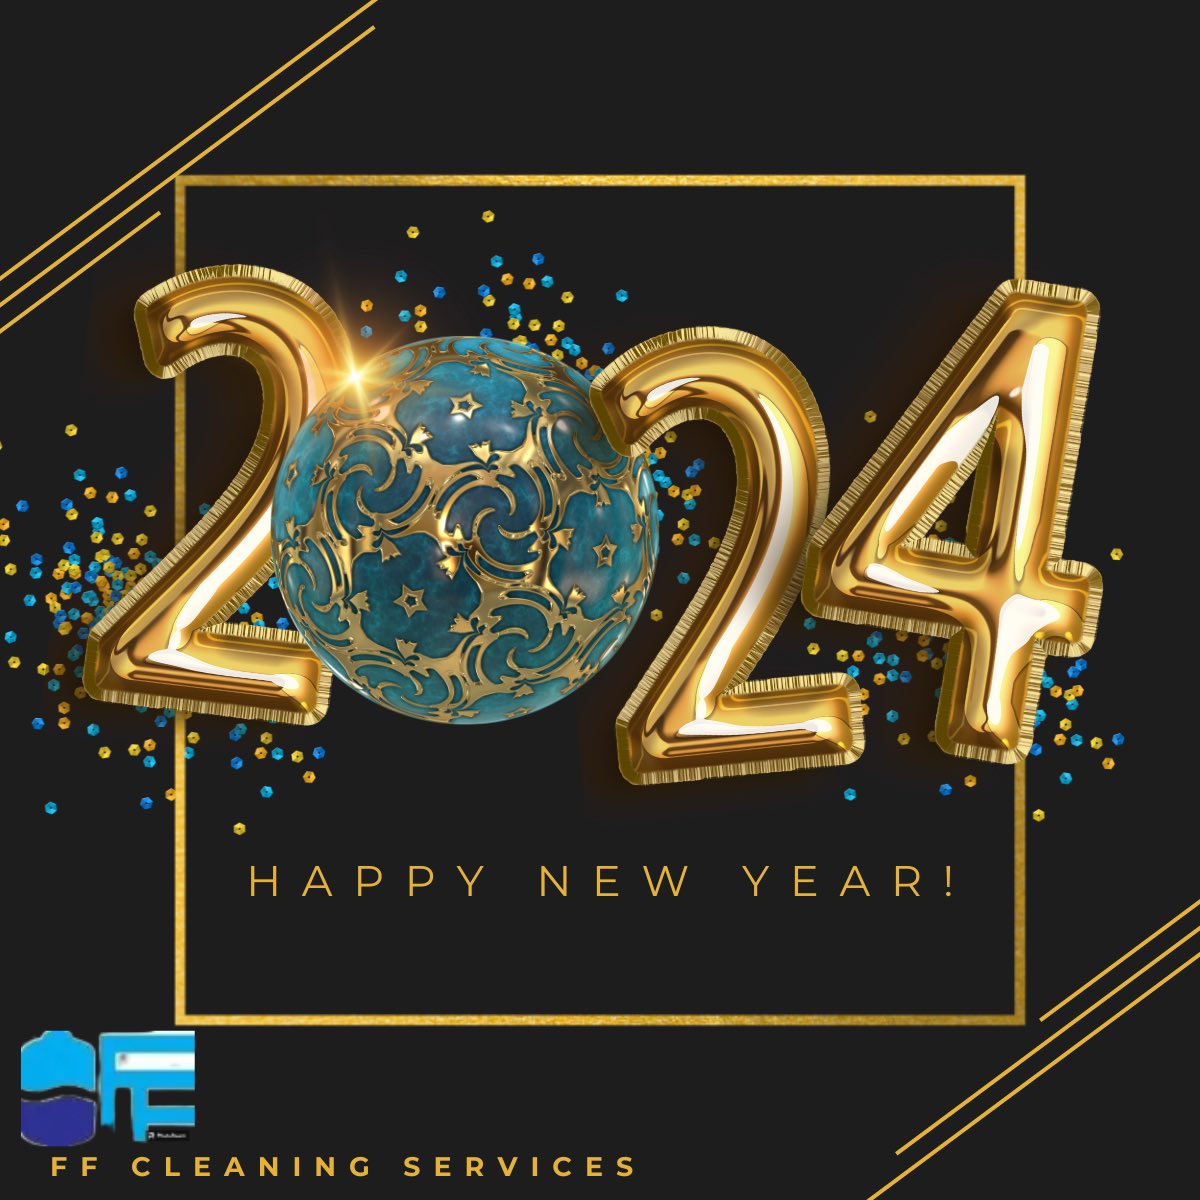 Let's wash away the old and shine in the new! ✨Wishing you all a 2024 sparkling with clean water, 💦happy homes, and bright blessings.  #HappyNewYear #WaterTankCleaning #Accra #FFCleaningServices